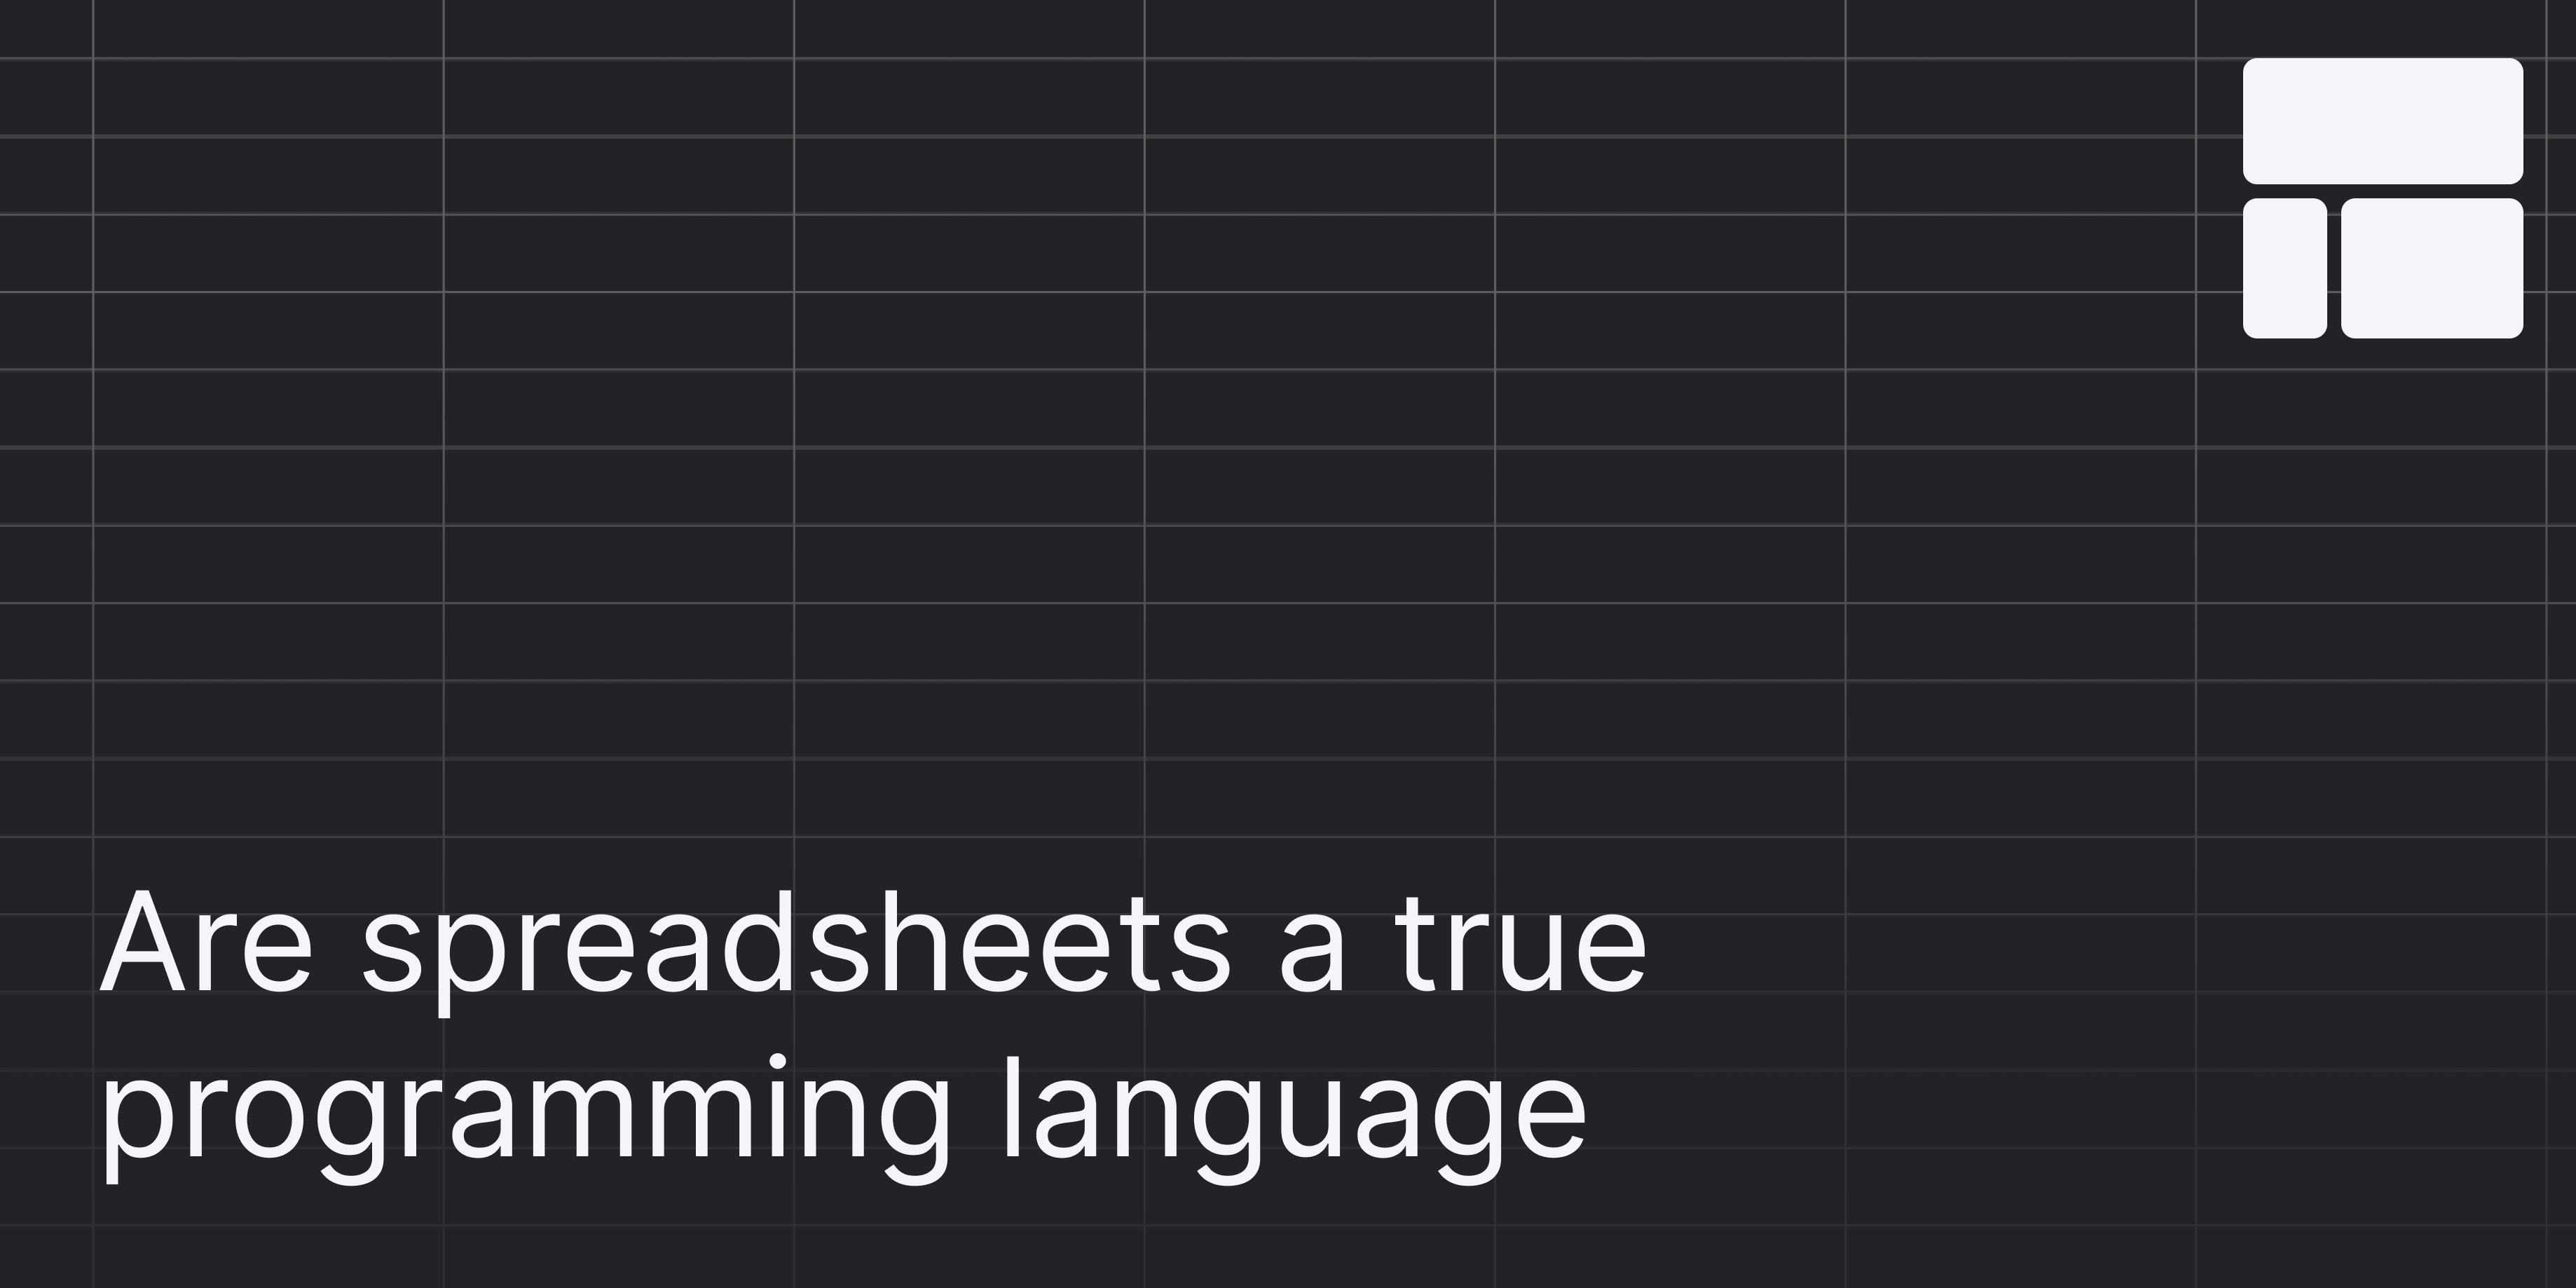 Cover Image for Are spreadsheets a true programming language?